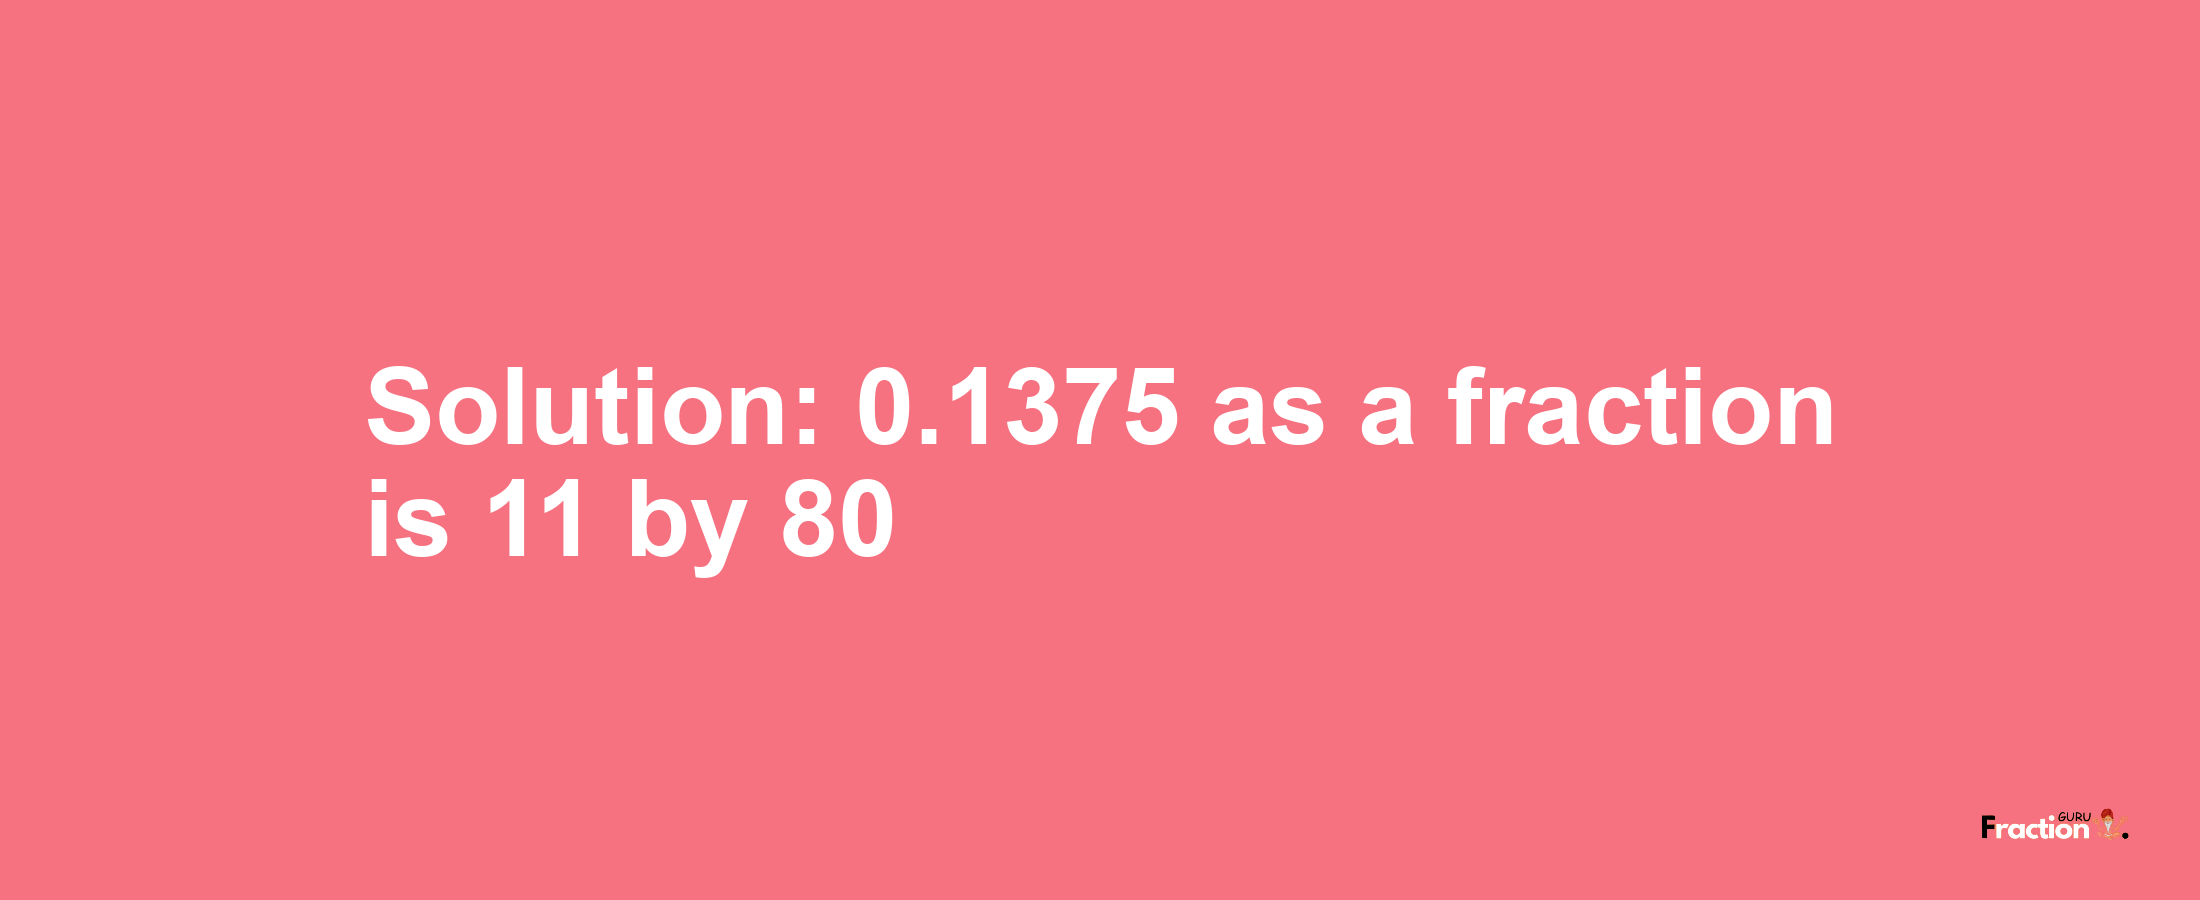 Solution:0.1375 as a fraction is 11/80